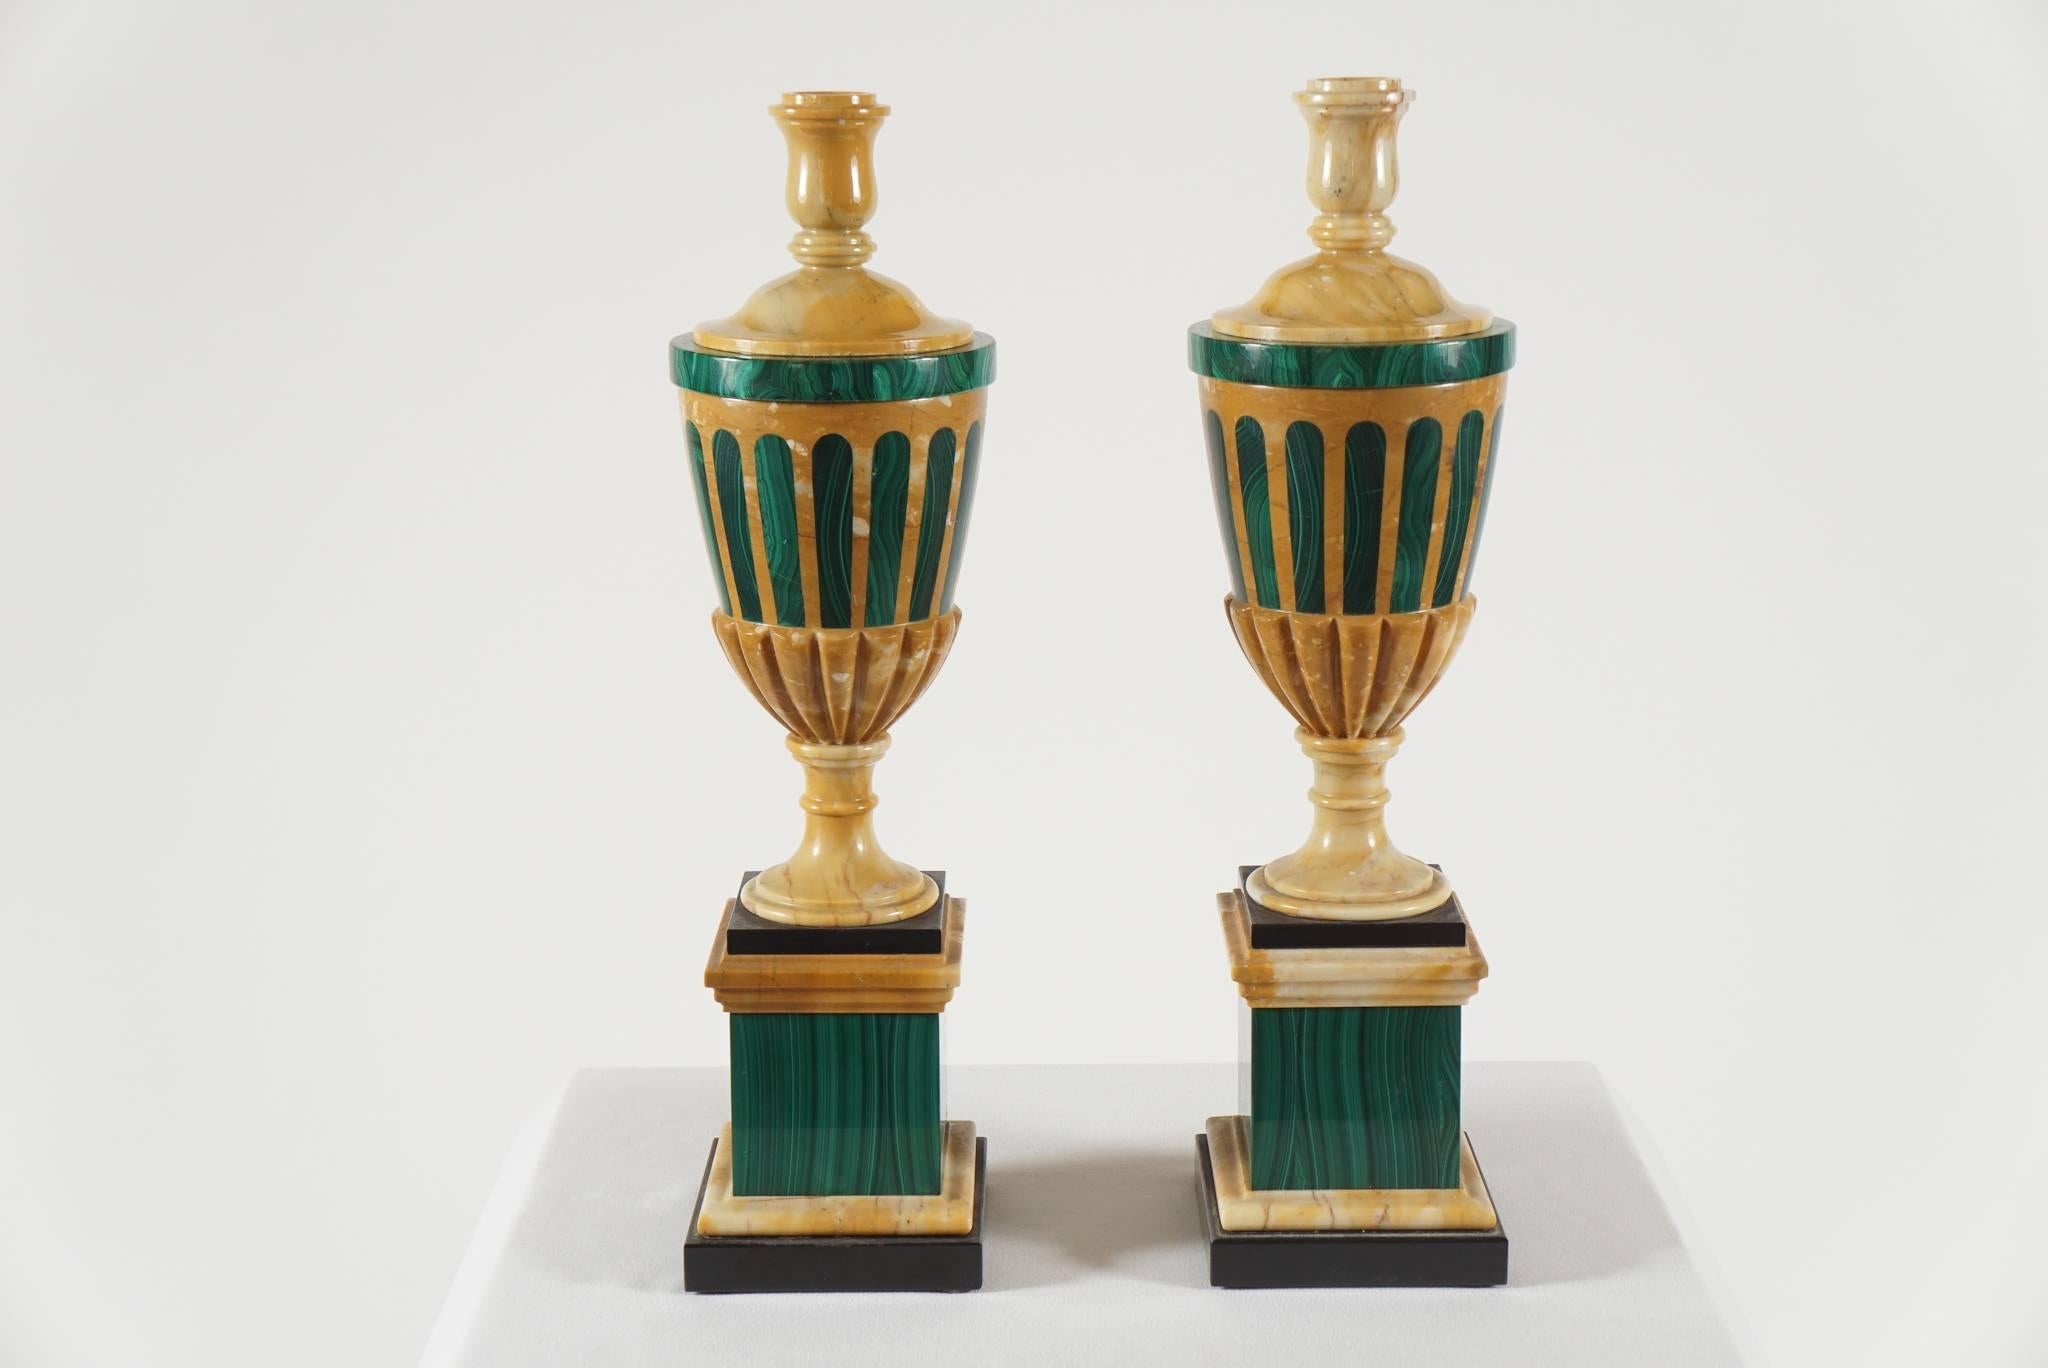 An elegant, circa 1900 pair of inlaid stone cassolettes of Adamesque urn form having reversible tops, with one side single candle cup, and the other finial side when not in use, on malachite inlaid giallo antico bodies on stepped malachite, giallo